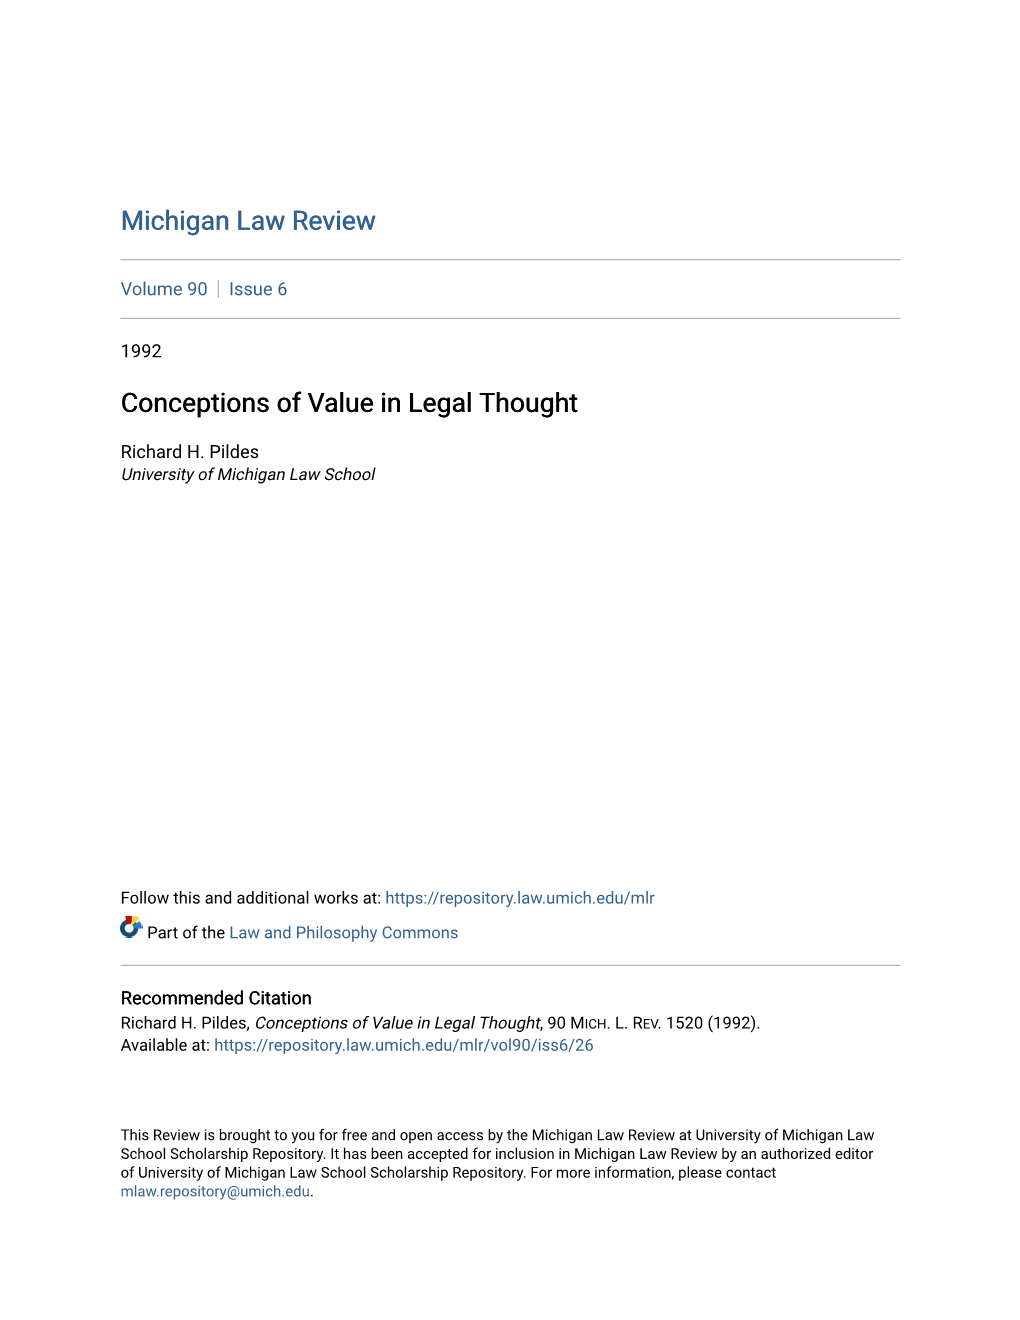 Conceptions of Value in Legal Thought